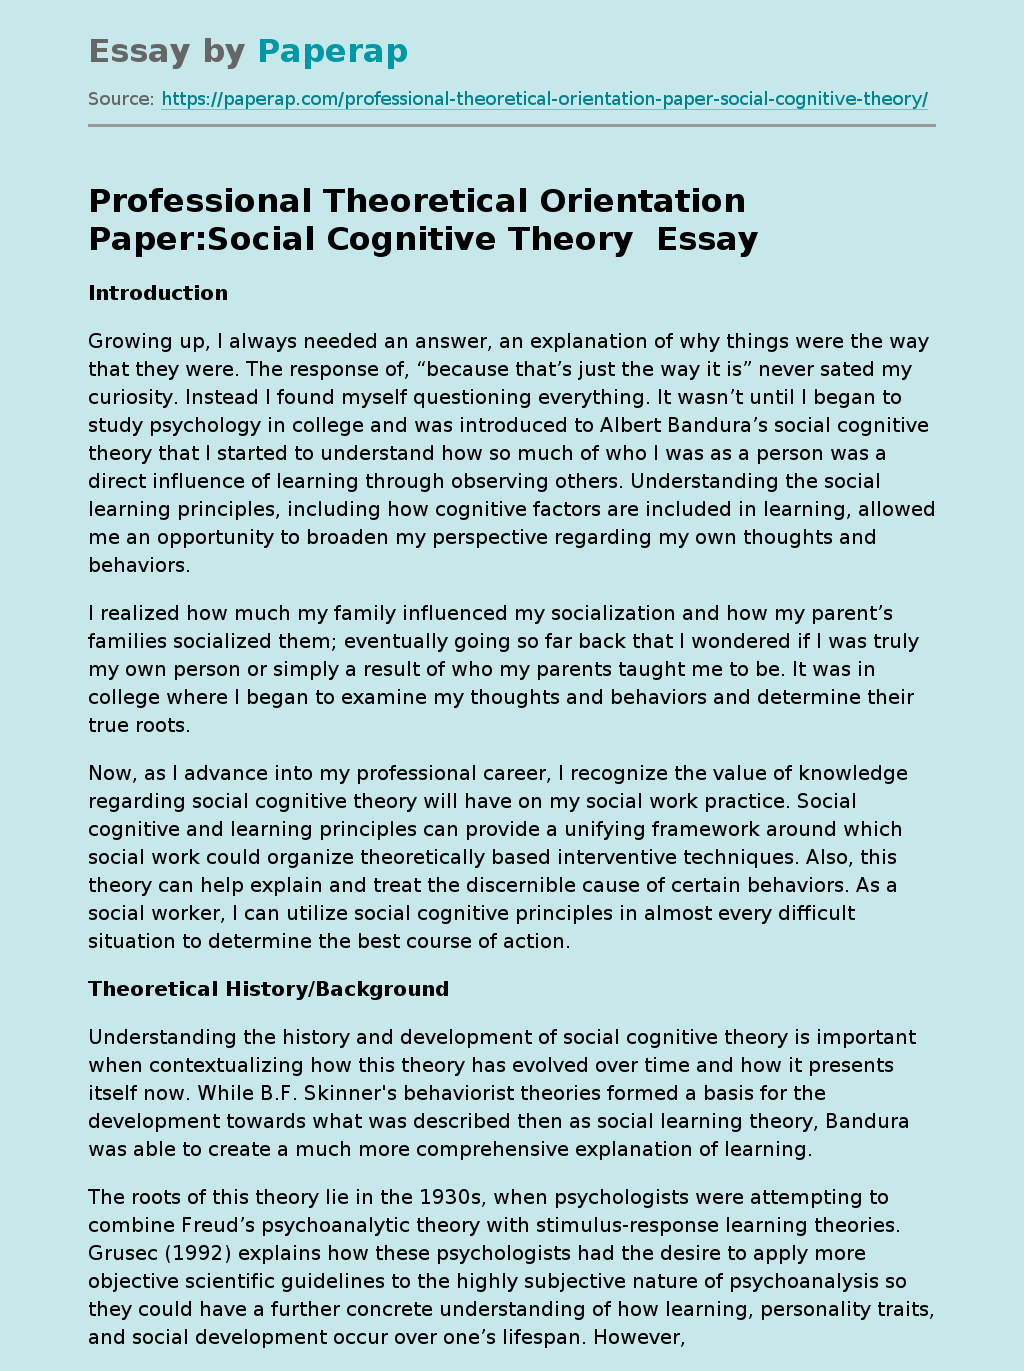 Professional Theoretical Orientation Paper:Social Cognitive Theory 